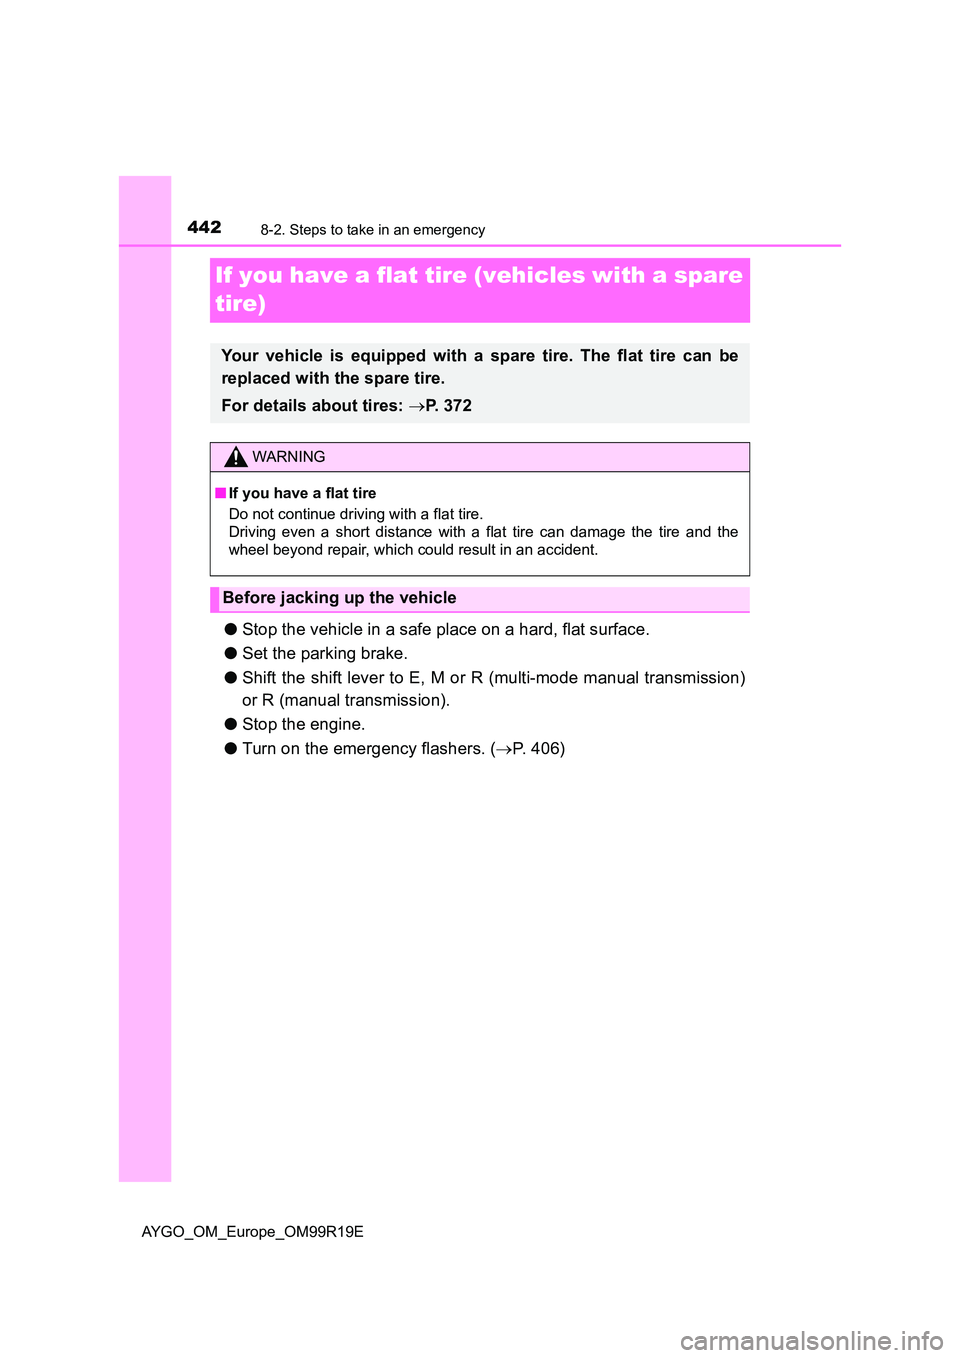 TOYOTA AYGO 2019  Owners Manual (in English) 4428-2. Steps to take in an emergency
AYGO_OM_Europe_OM99R19E
If you have a flat tire (vehicles with a spare  
tire)
● Stop the vehicle in a safe place on a hard, flat surface. 
● Set the parking 